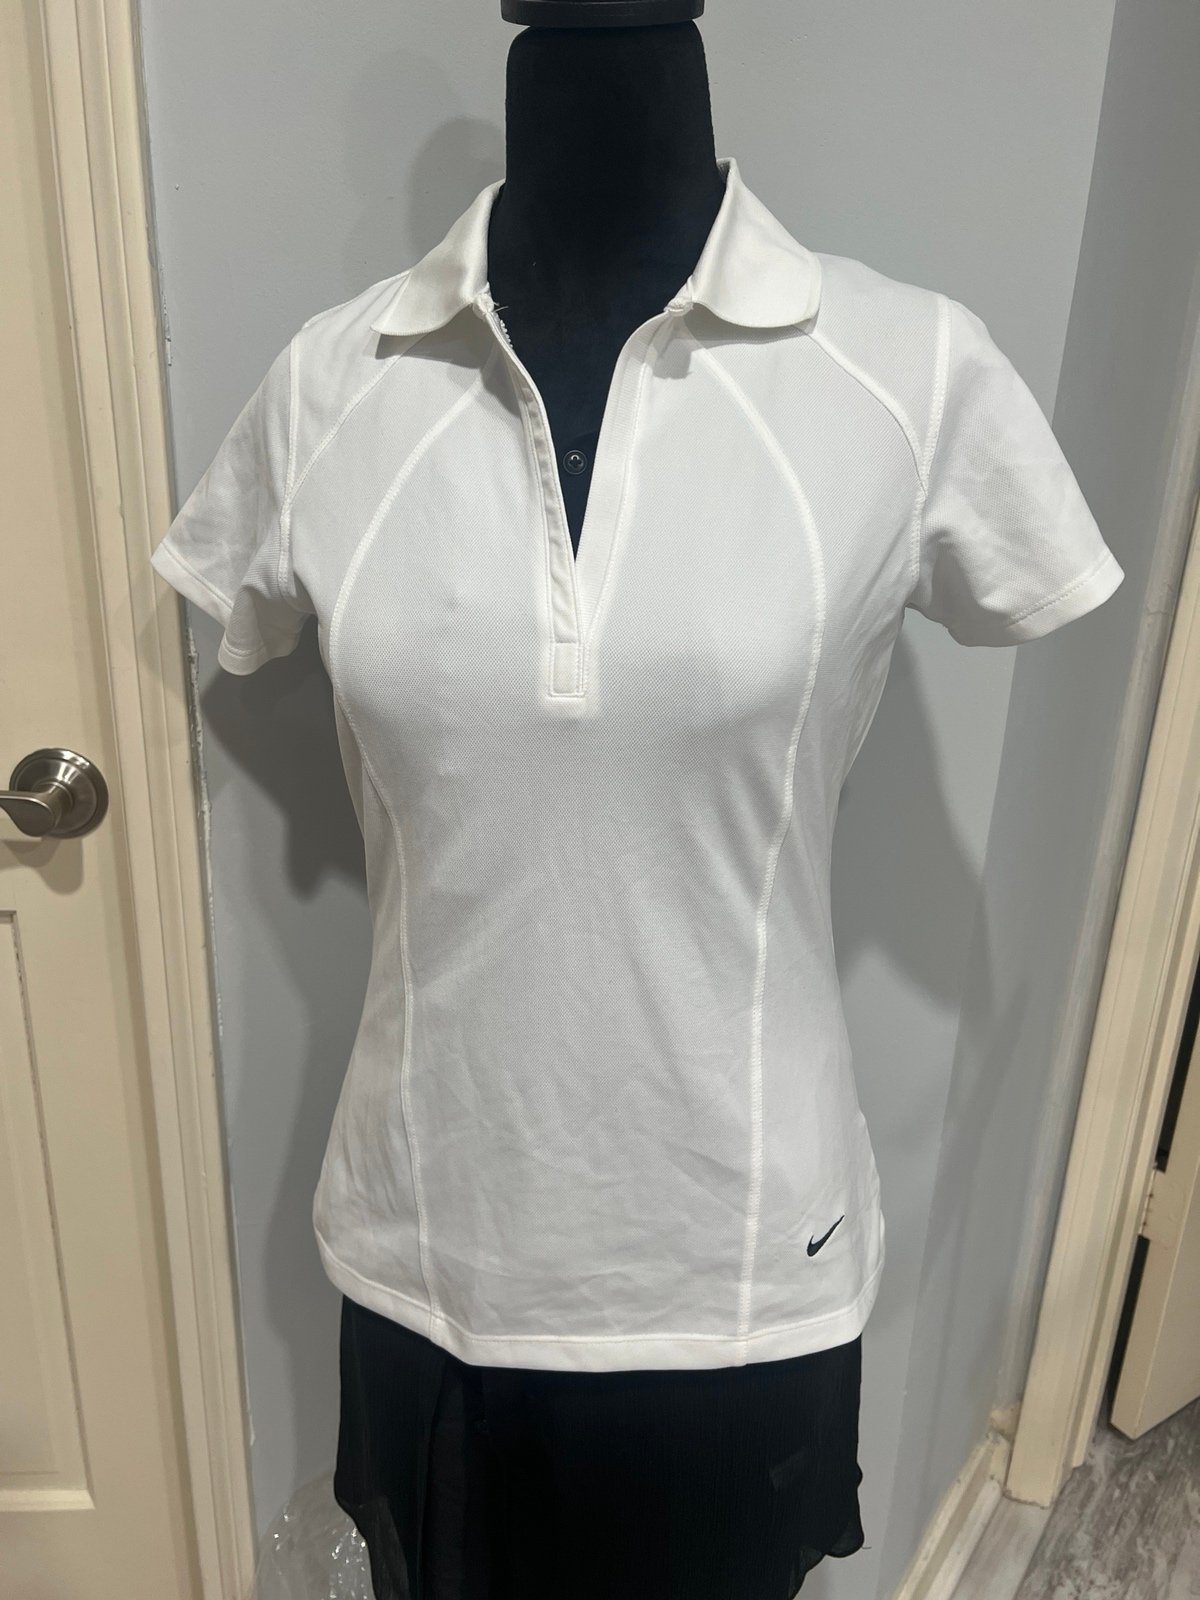 floor price Nike womens golf Polo N5hzOUw8X Outlet Stor